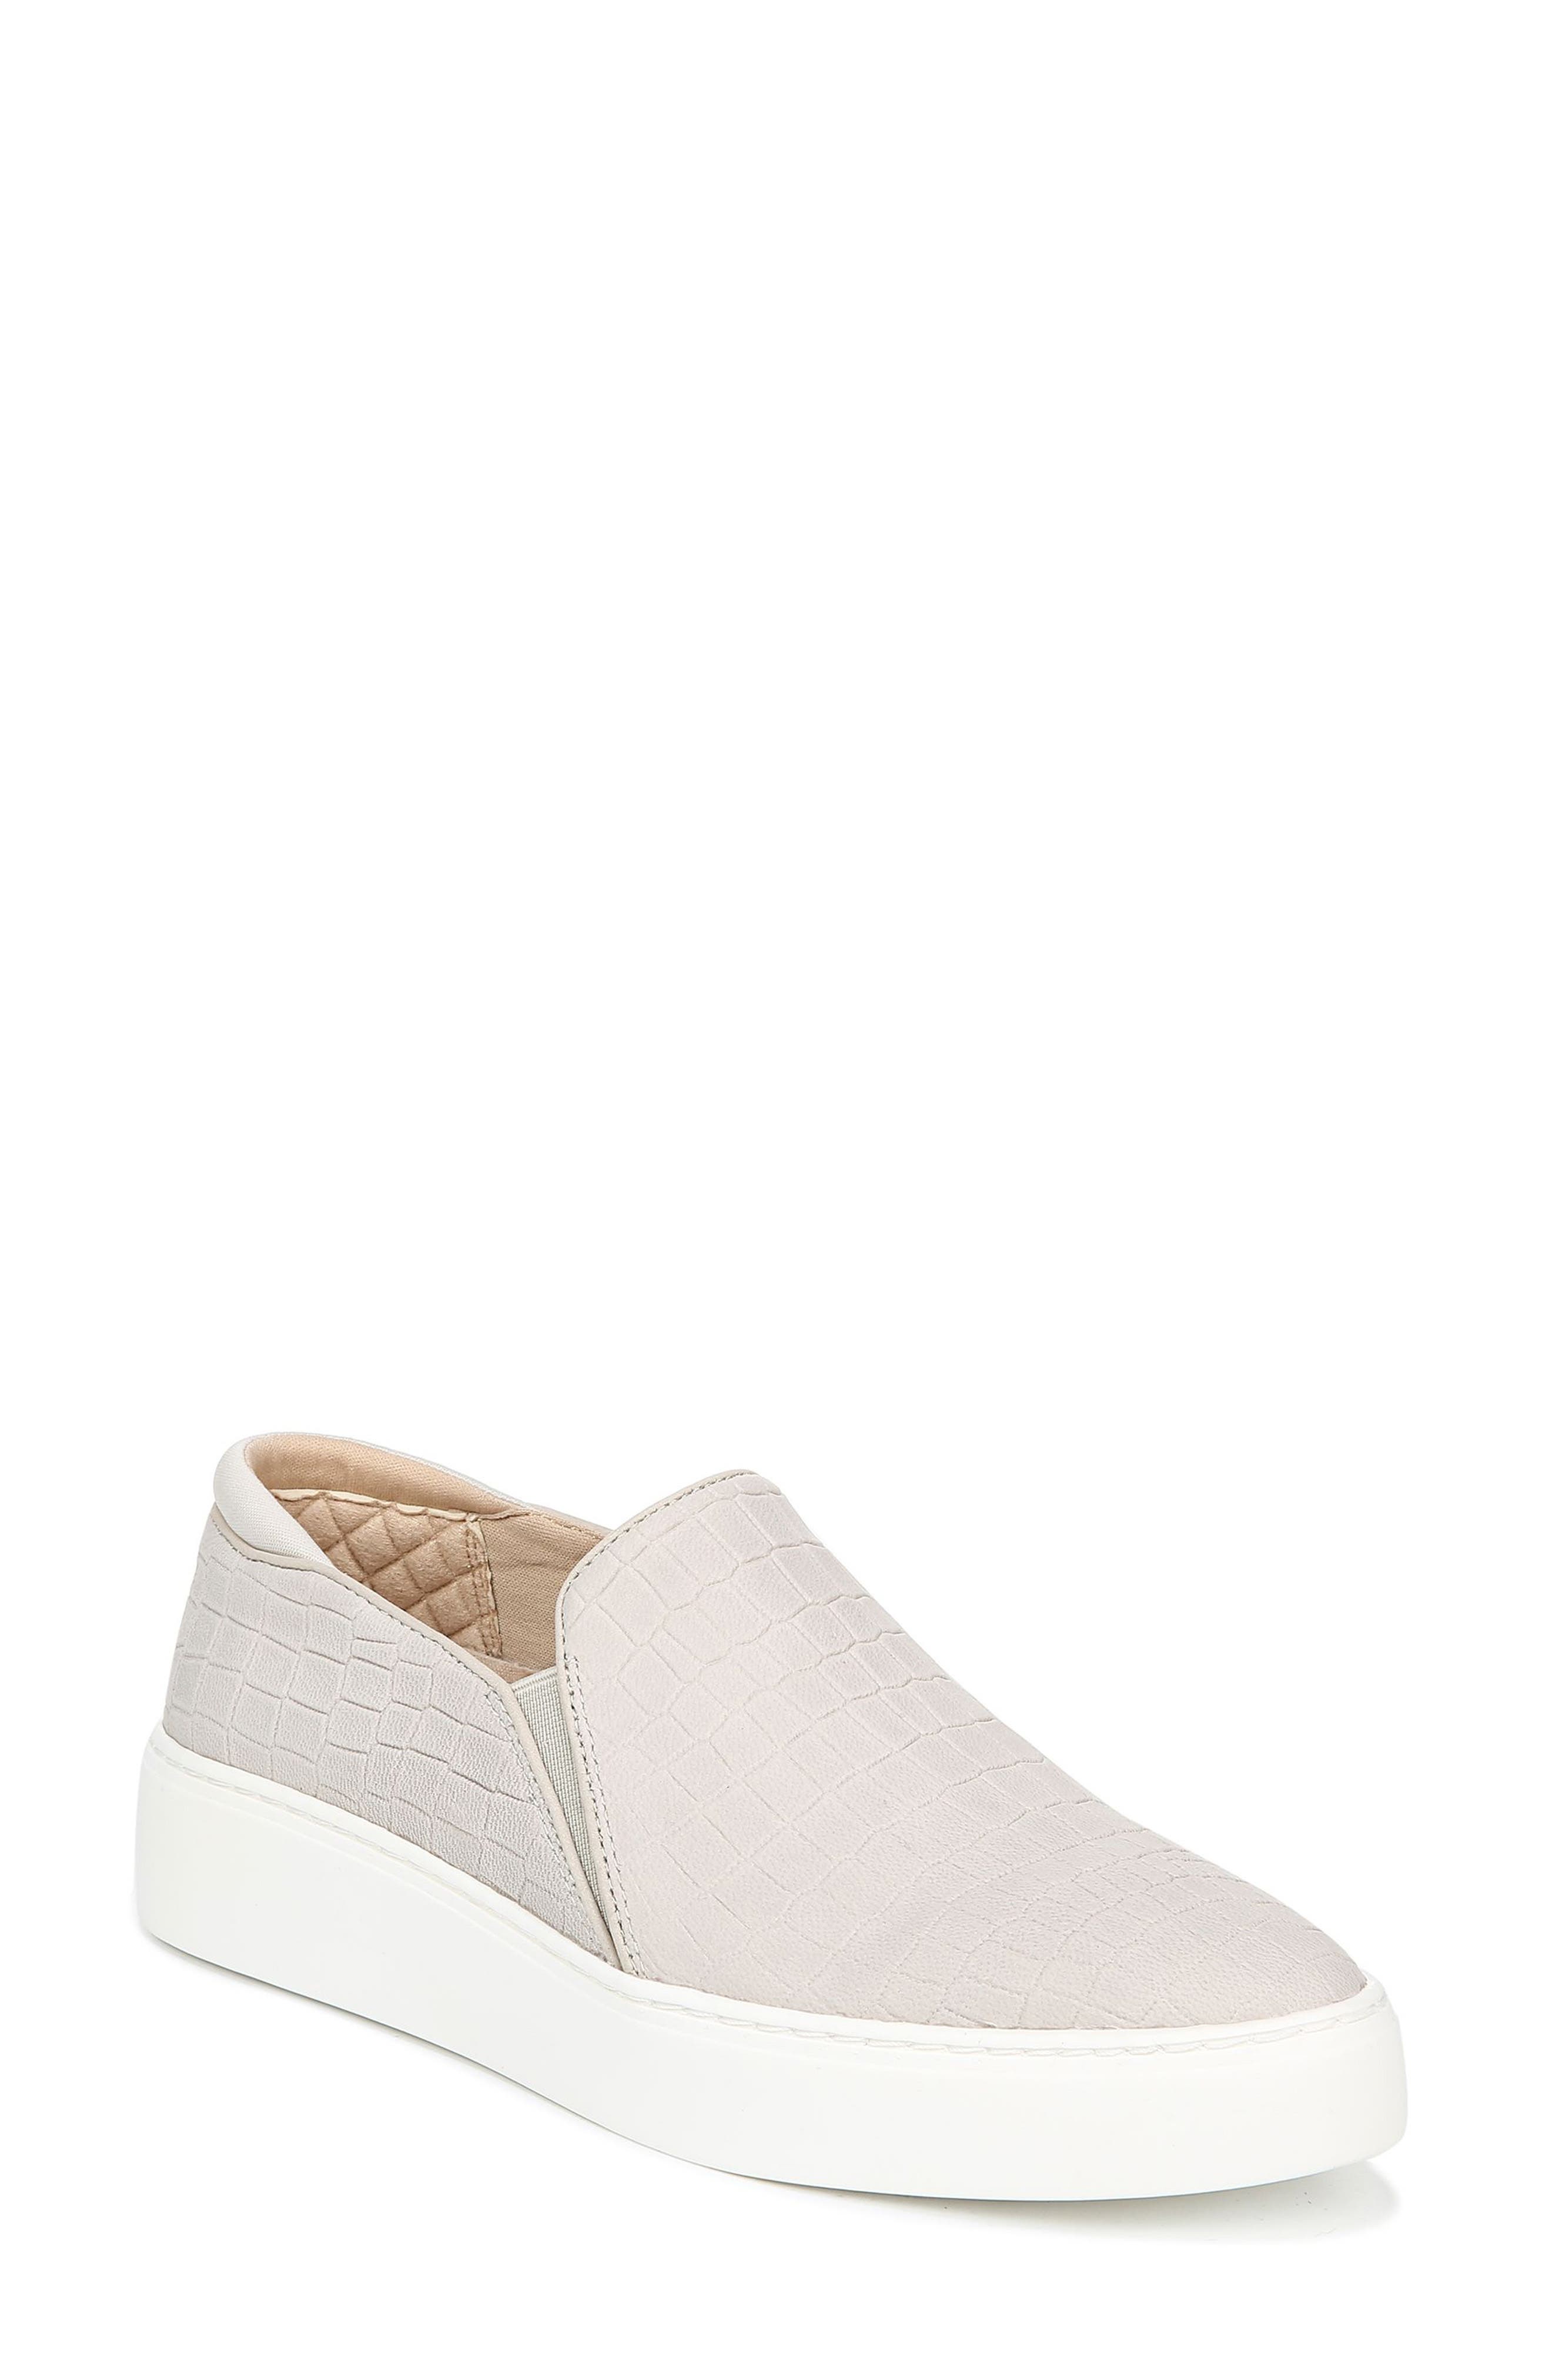 dr scholls pointed toe sneakers